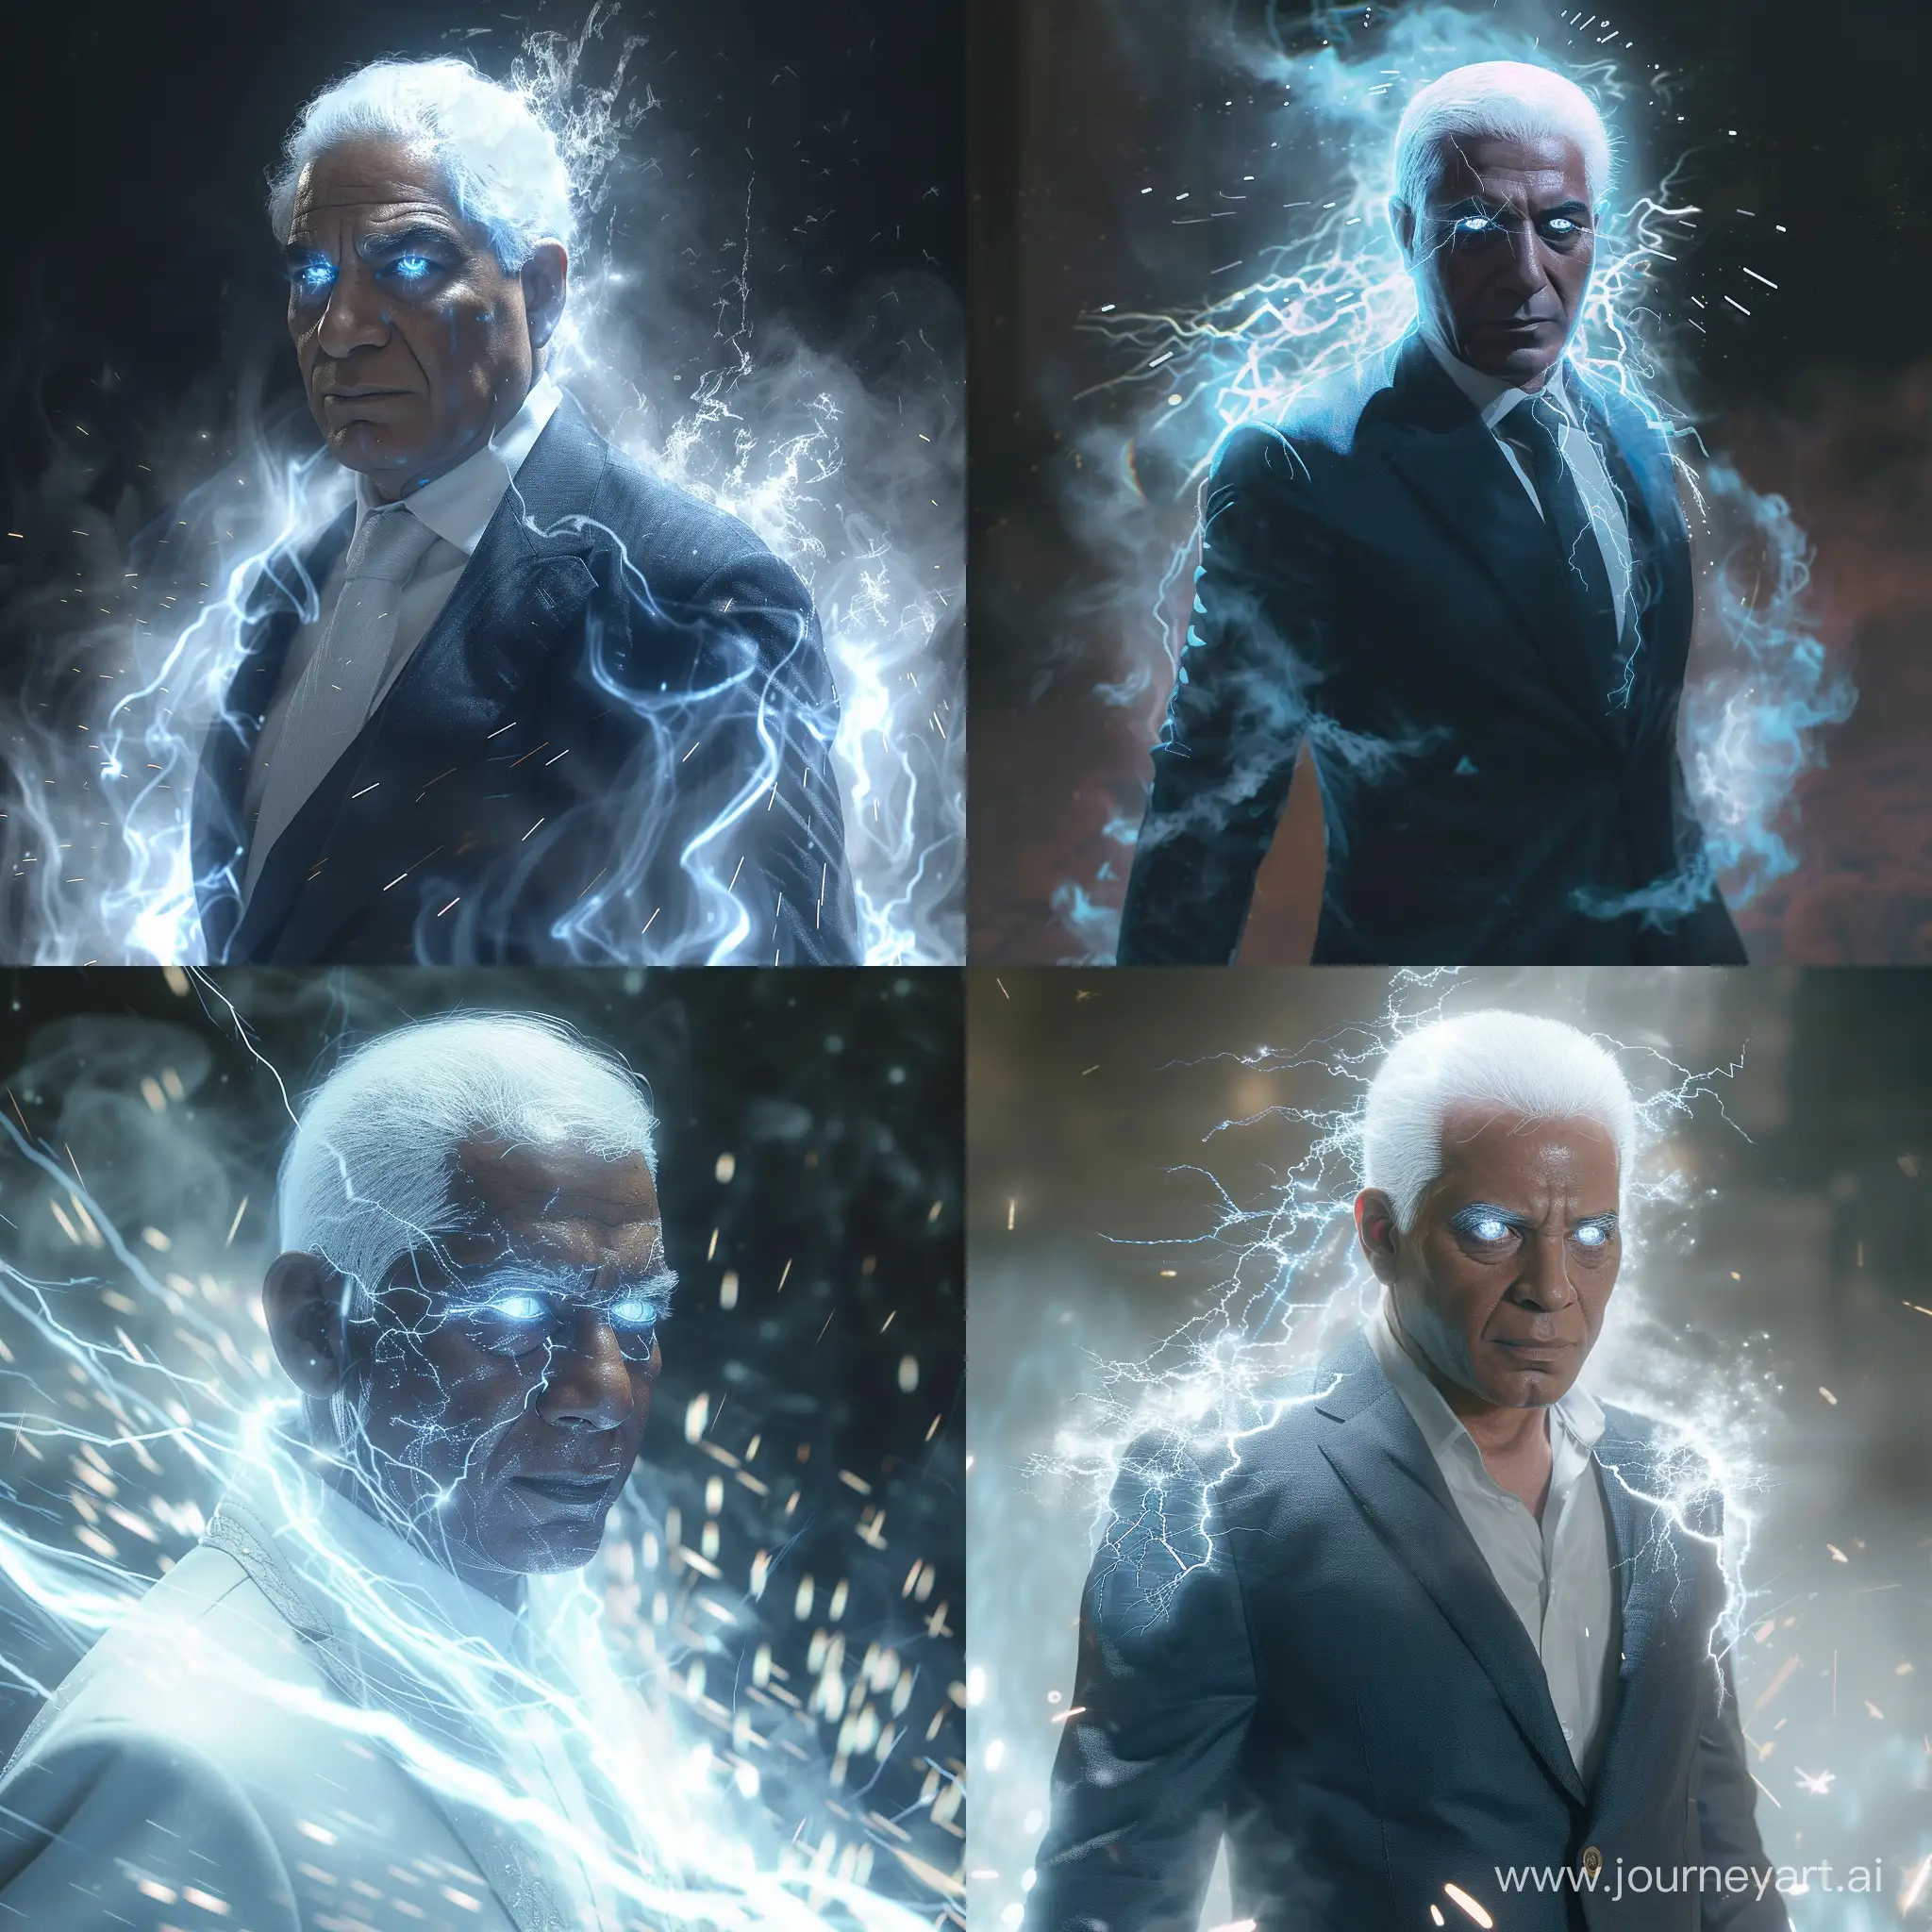 Abdel Fattah el-Sisi, embodying Ultra Instinct transformation: white hair, eyes glowing silver, aura of translucent blue with white sparks surrounding him. Stance relaxed yet ready, embodying calm mastery and power. Dressed in his signature